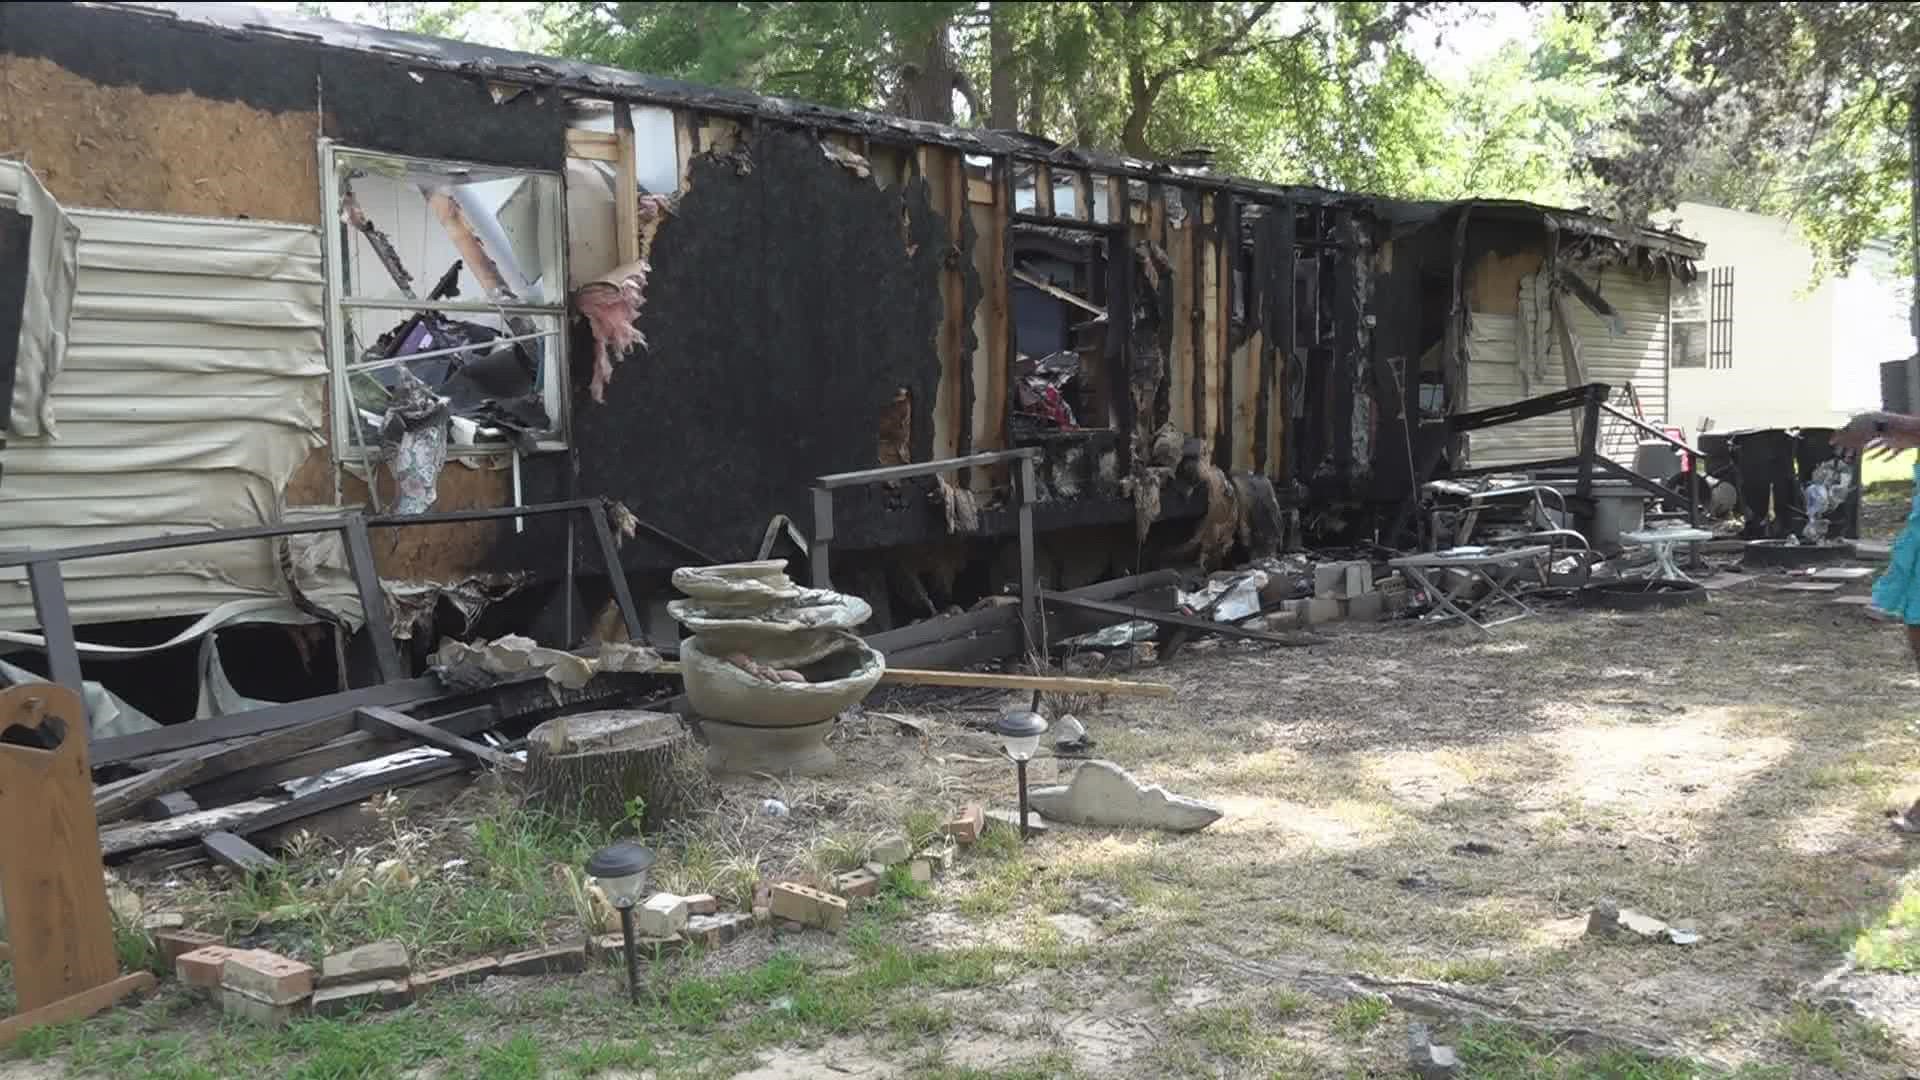 Johnny Carpenter's home was considered a complete loss. He is still not sure what started the fire.